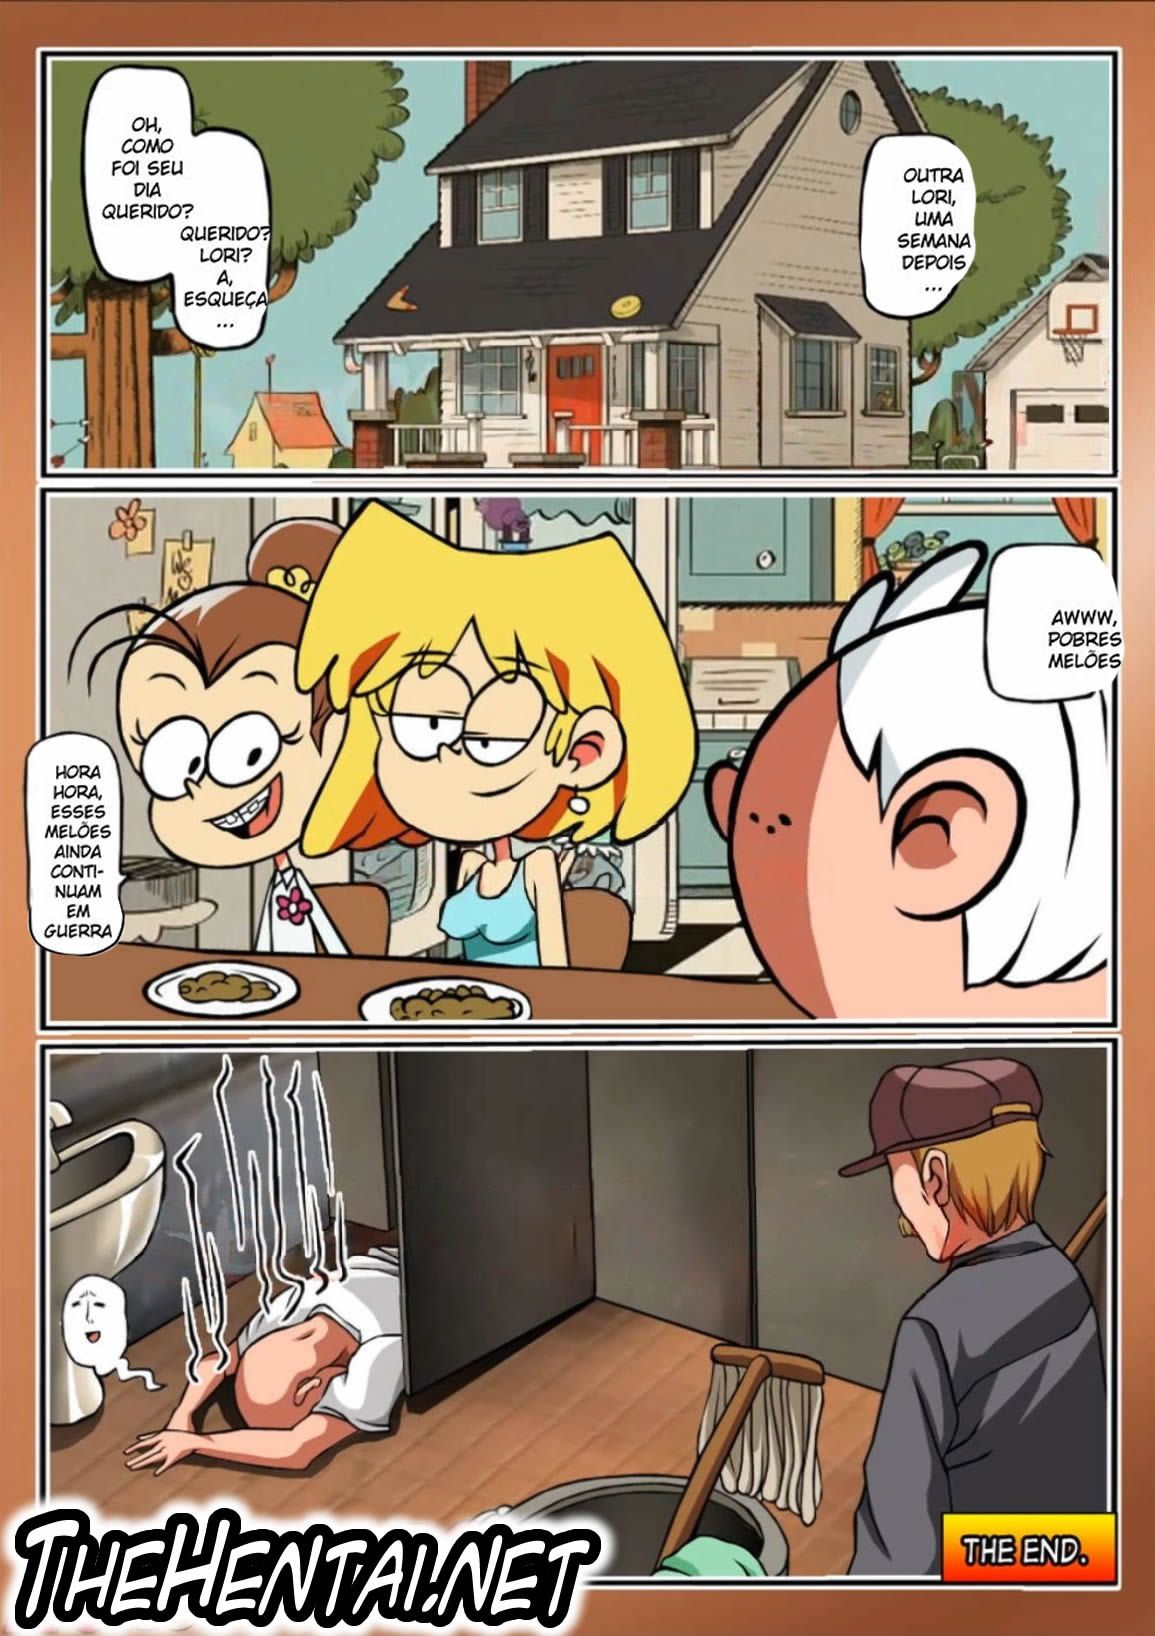 The Lewd House: Another Lori (The Loud House)